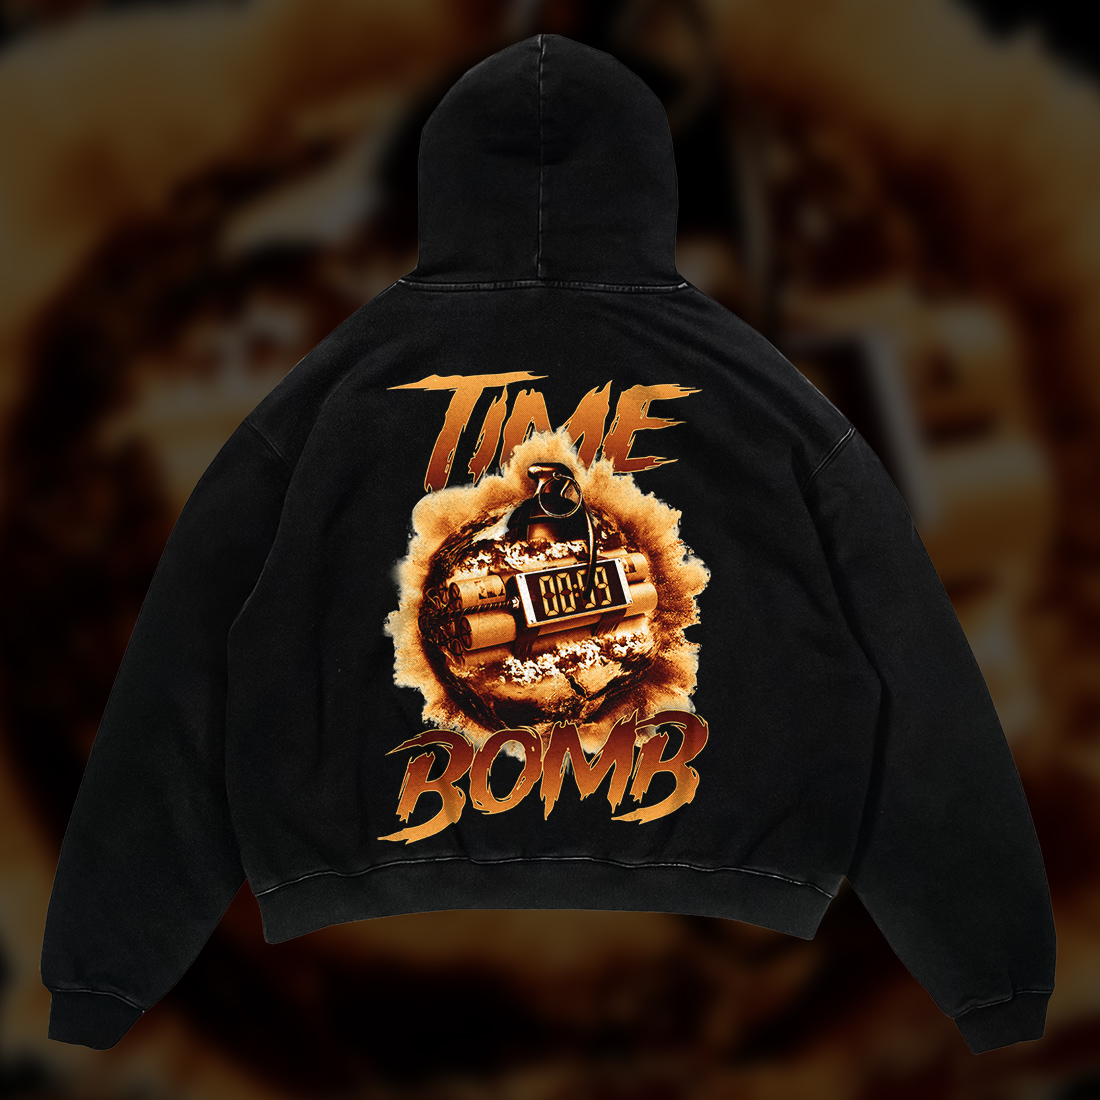 Black hoodie with fire logo.